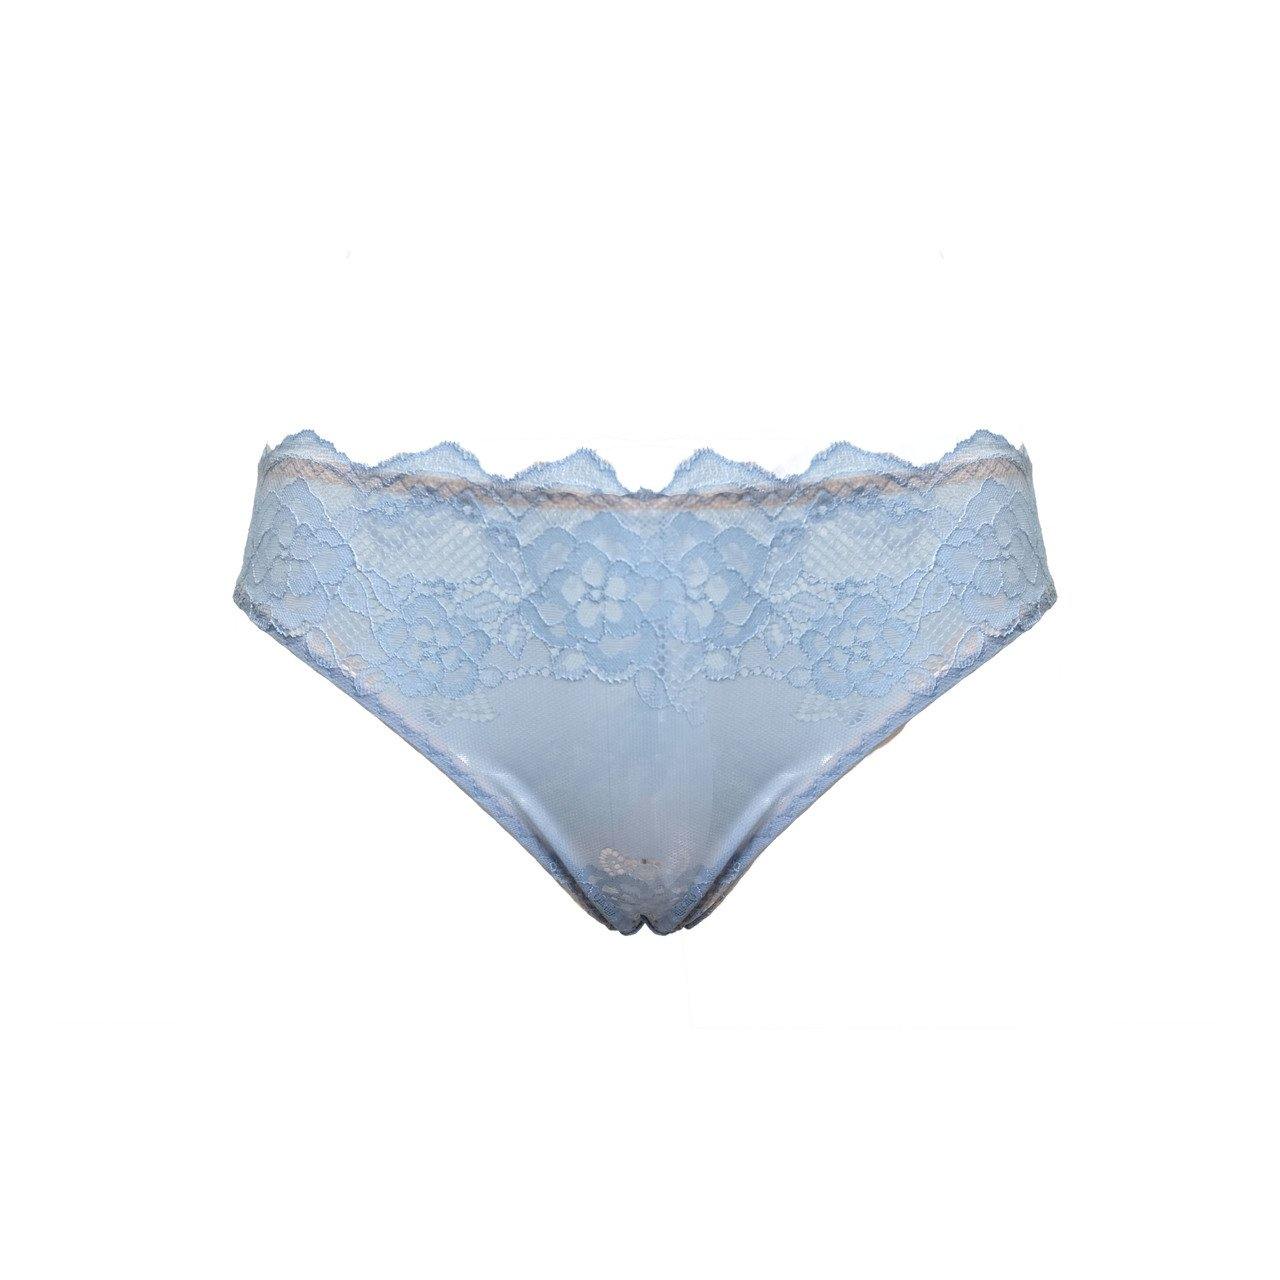 the baby lace panty - Our Bralette Club